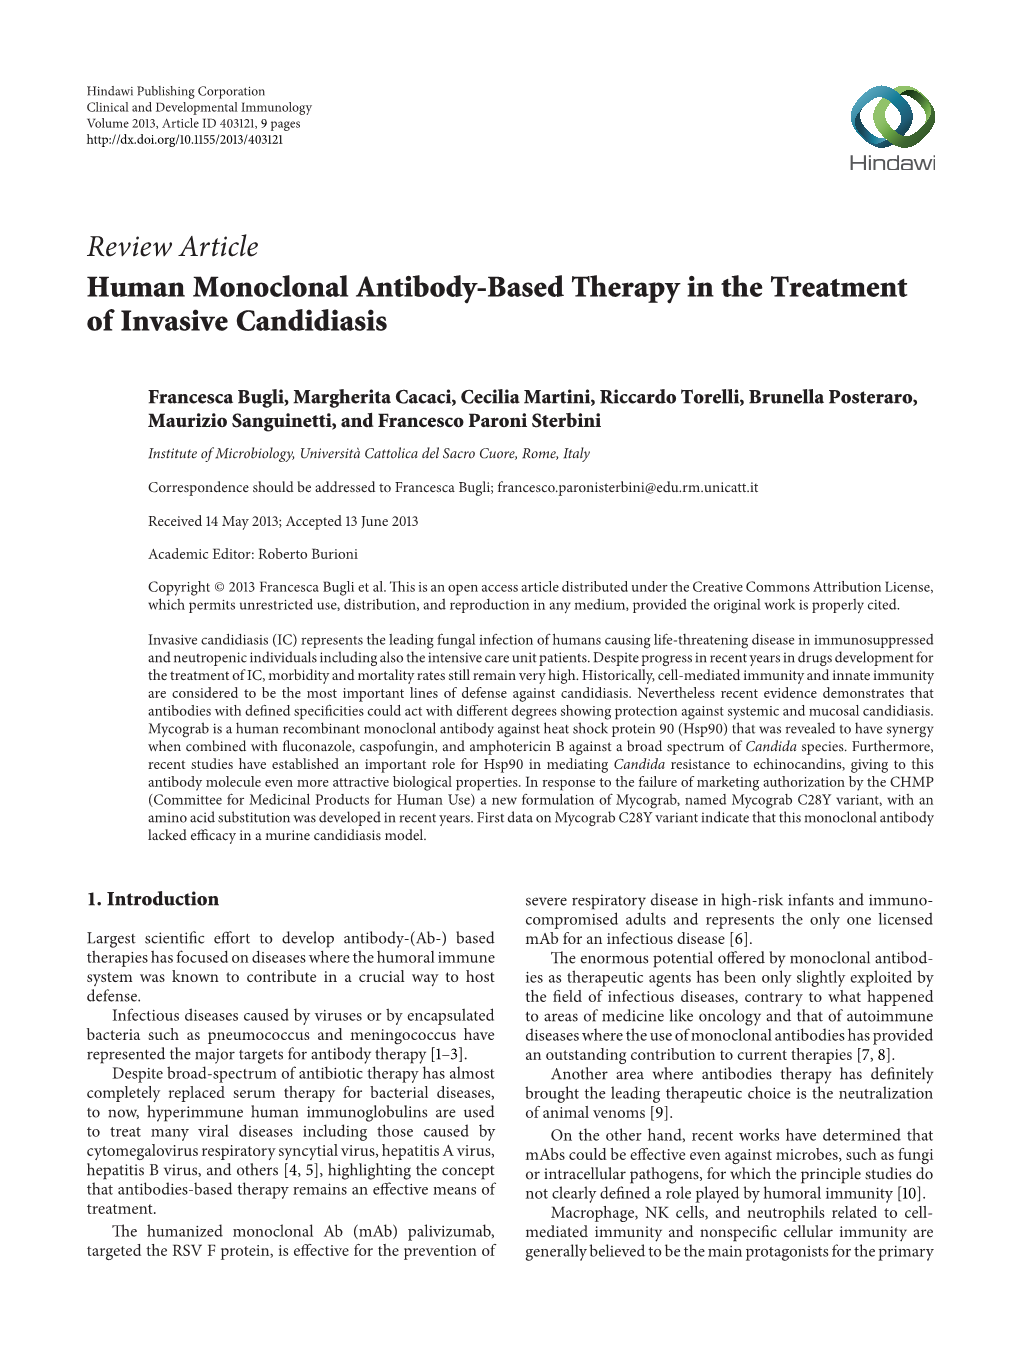 Human Monoclonal Antibody-Based Therapy in the Treatment of Invasive Candidiasis